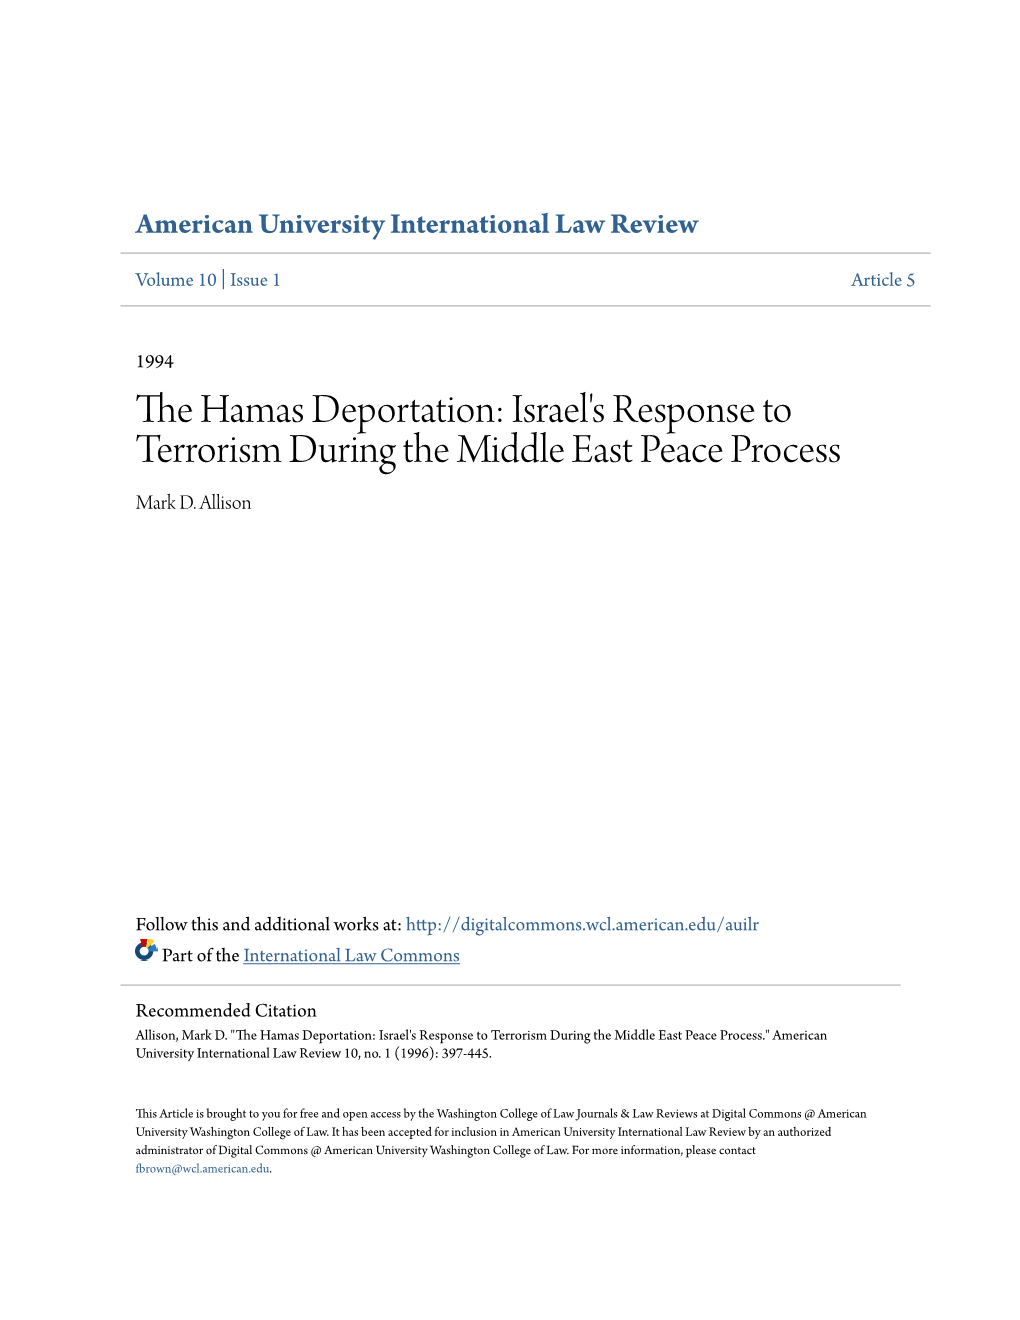 The Hamas Deportation: Israel's Response to Terrorism During the Middle East Peace Process